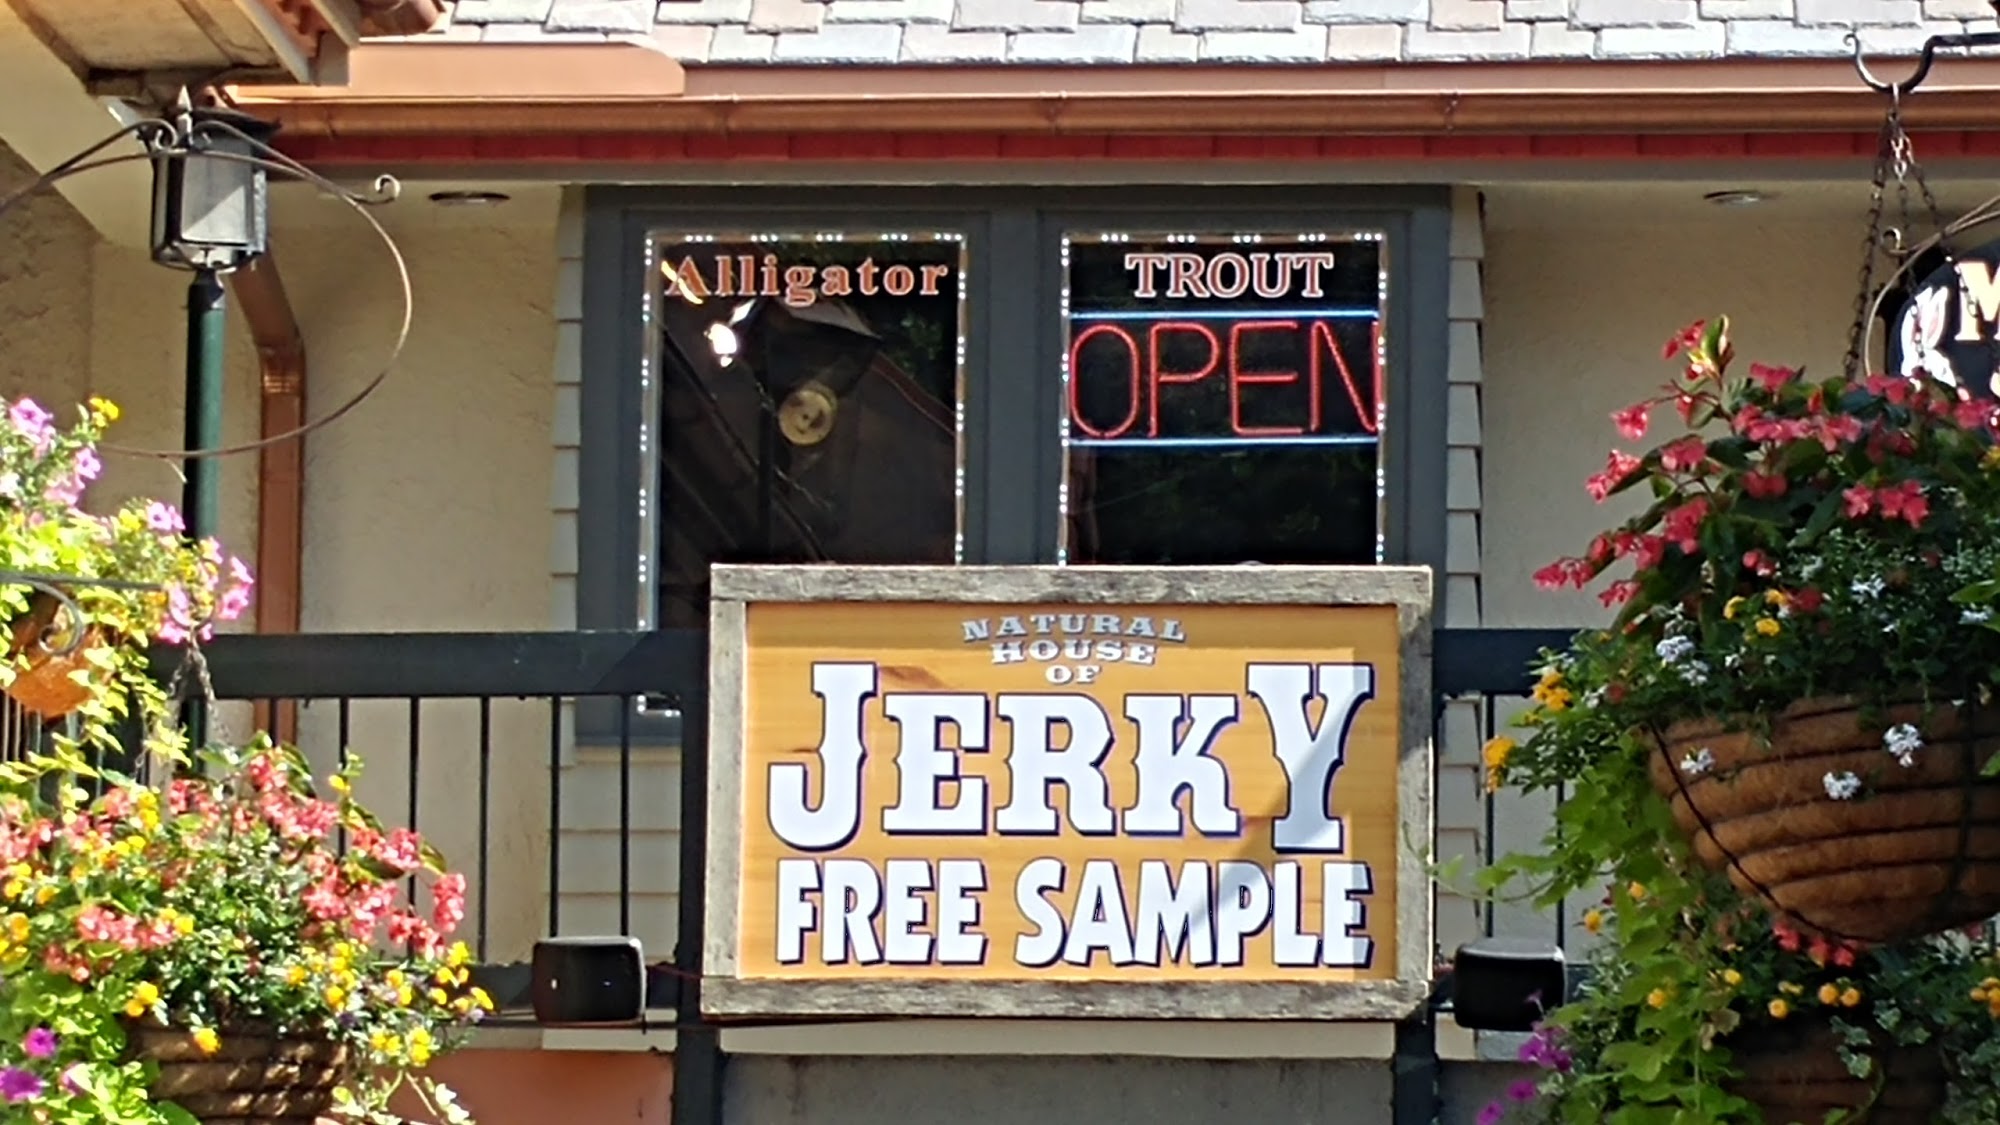 Natural house of jerky / Jerky Store & More